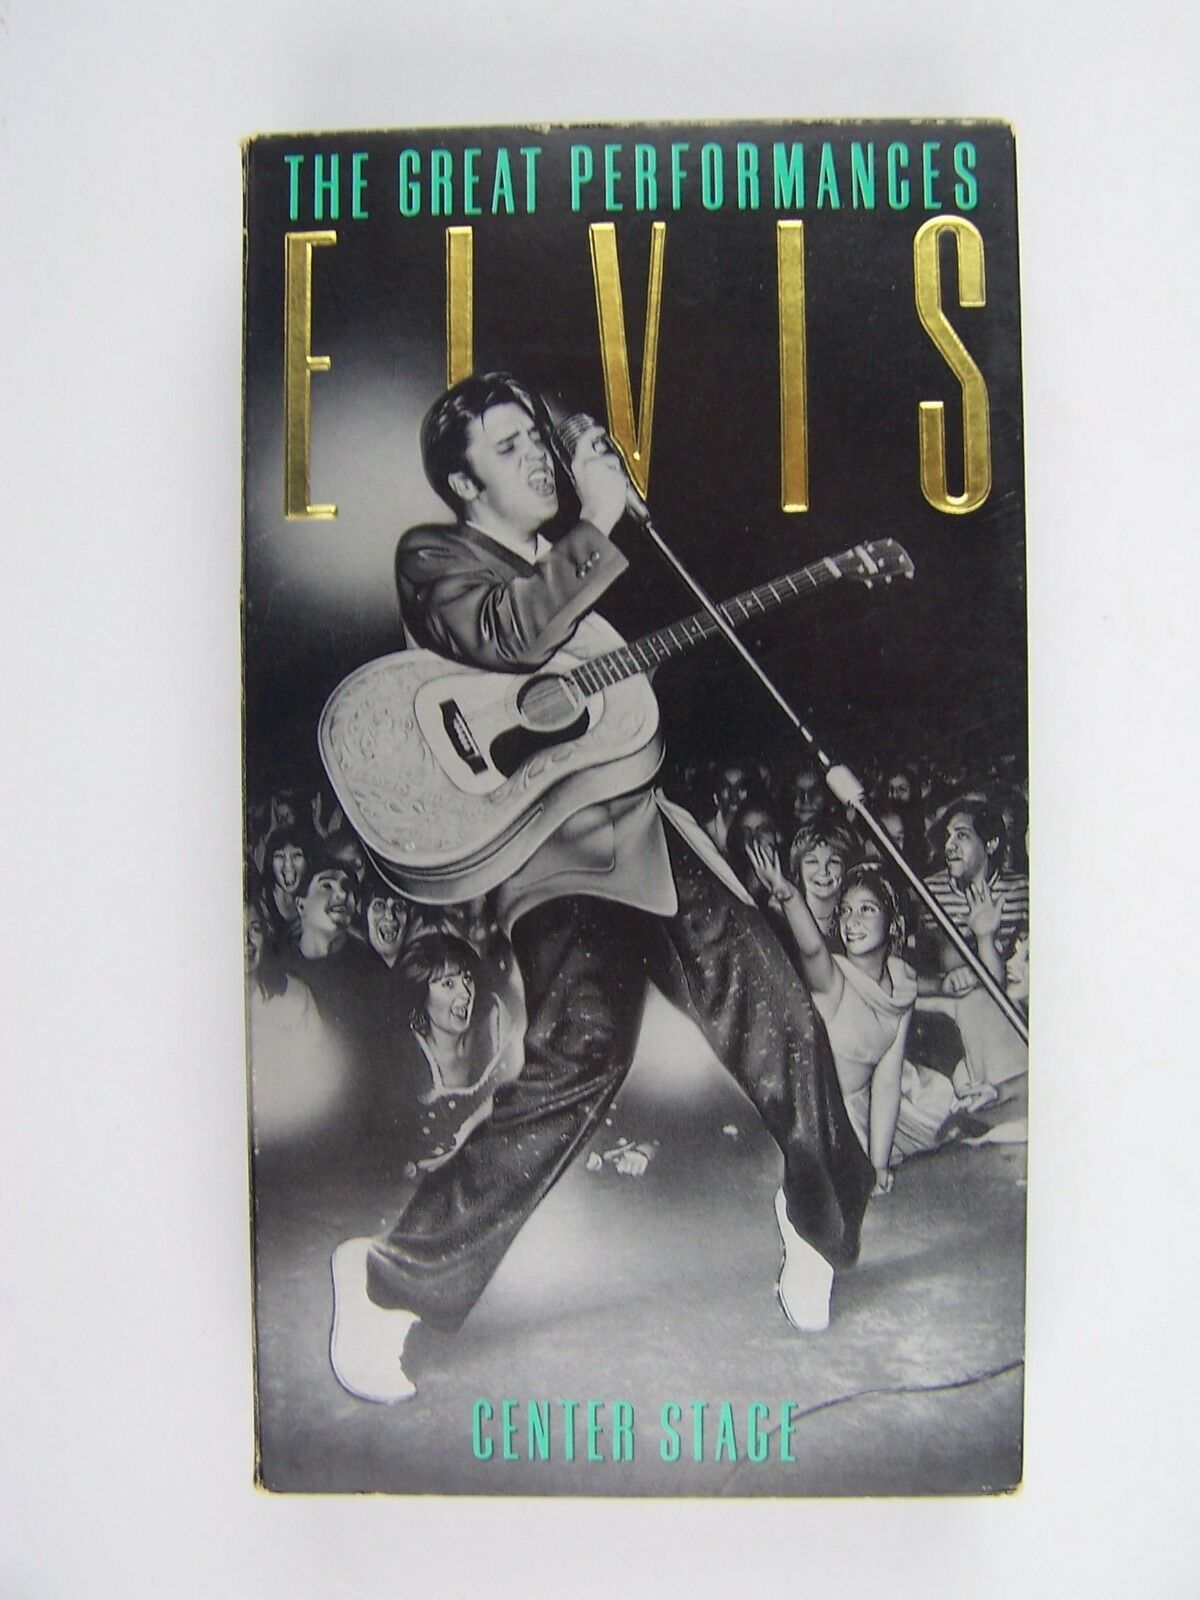 Primary image for Elvis Presley - The Great Performances Vol 1 - Center Stage VHS Video Tape